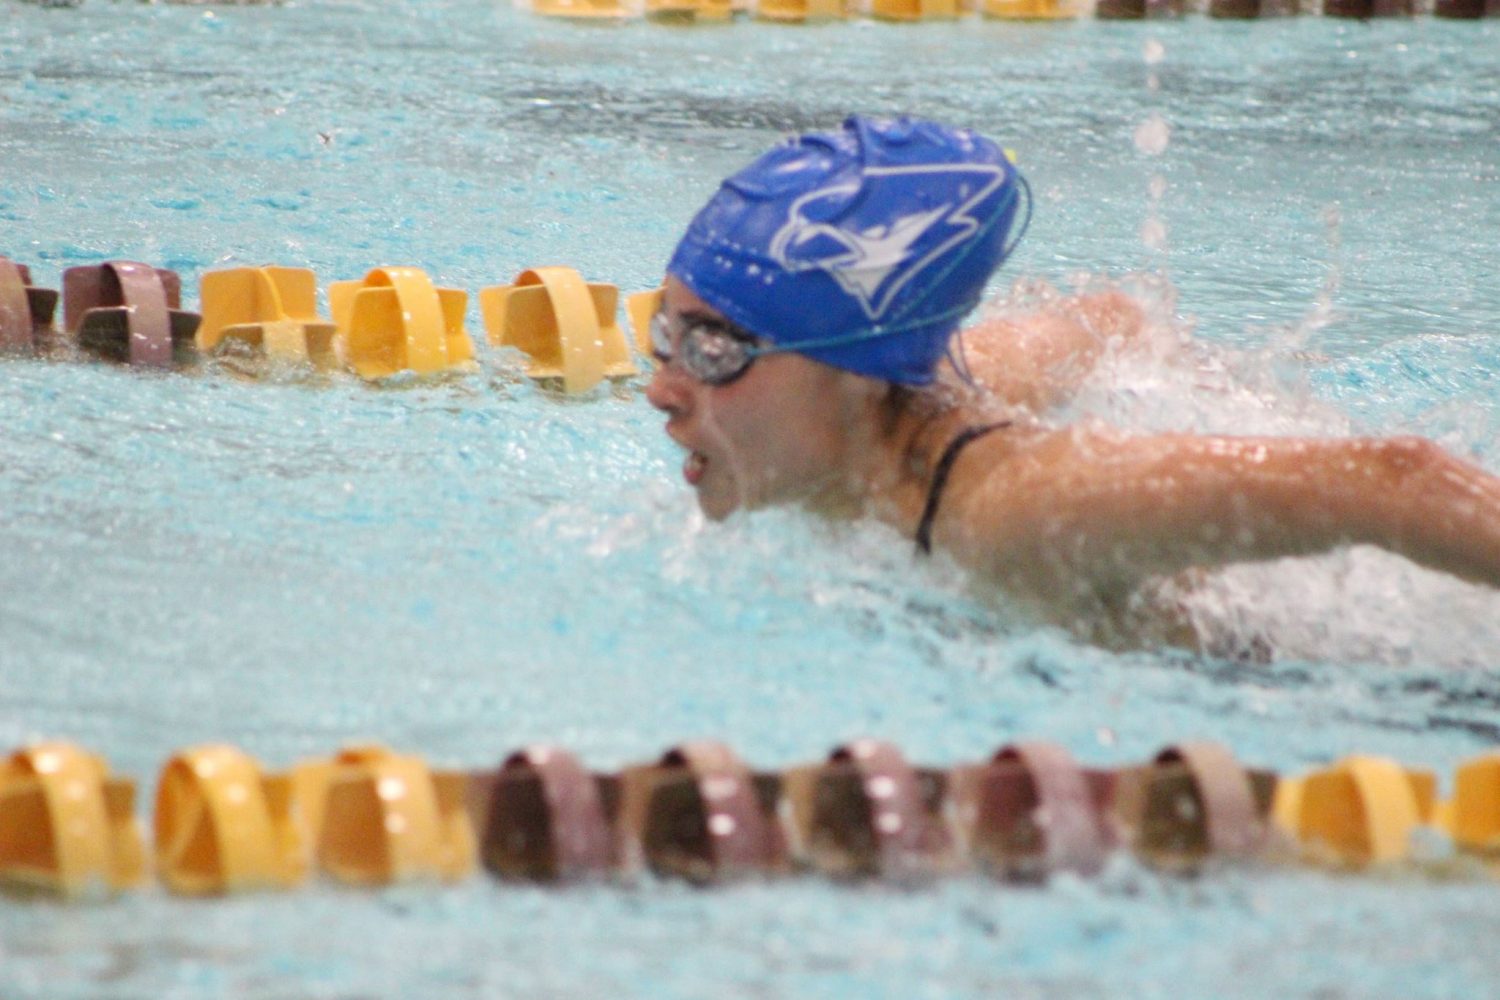 Merrill swimmers set personal bests, new records at conference meet